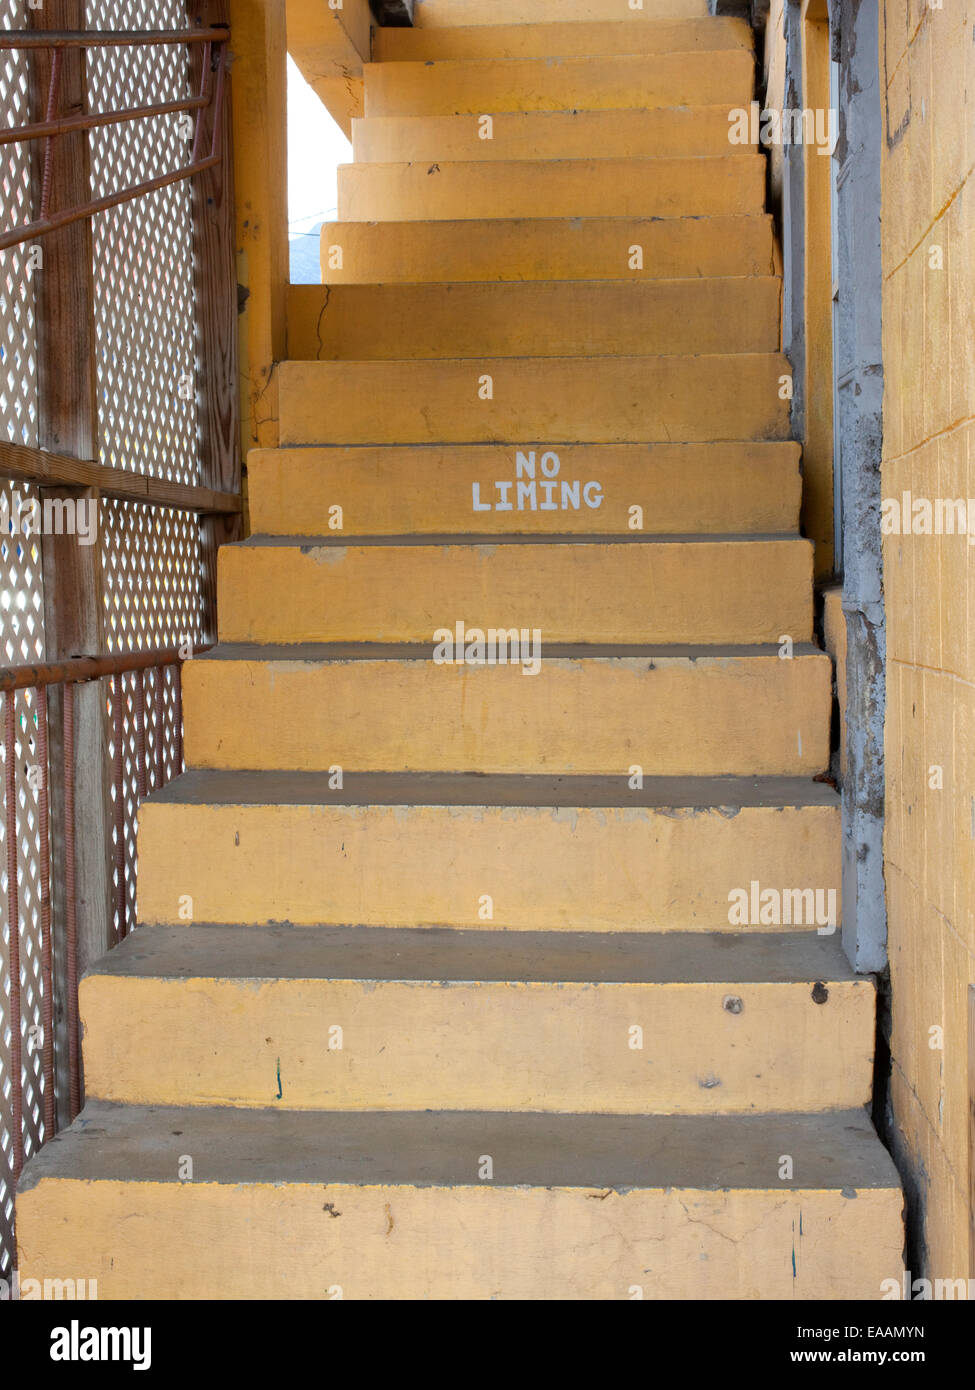 stairs with 'no liming' sign Stock Photo